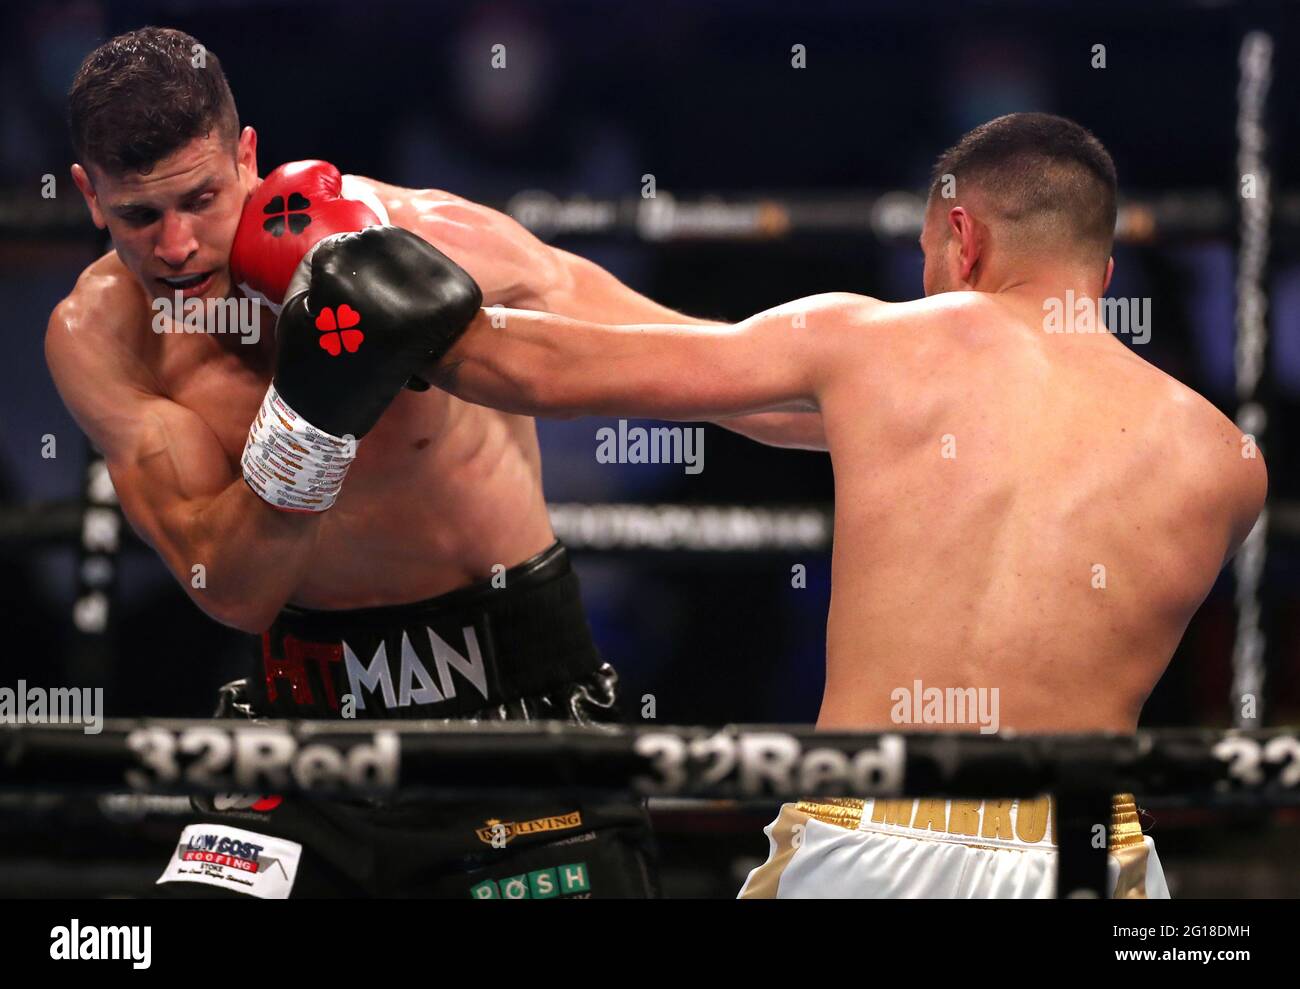 Nathan Heaney (left) and Iliyan Markov in the International Middleweight Contest during the Boxing event at the Telford International Centre, Telford. Picture date: Saturday June 5, 2021. Stock Photo